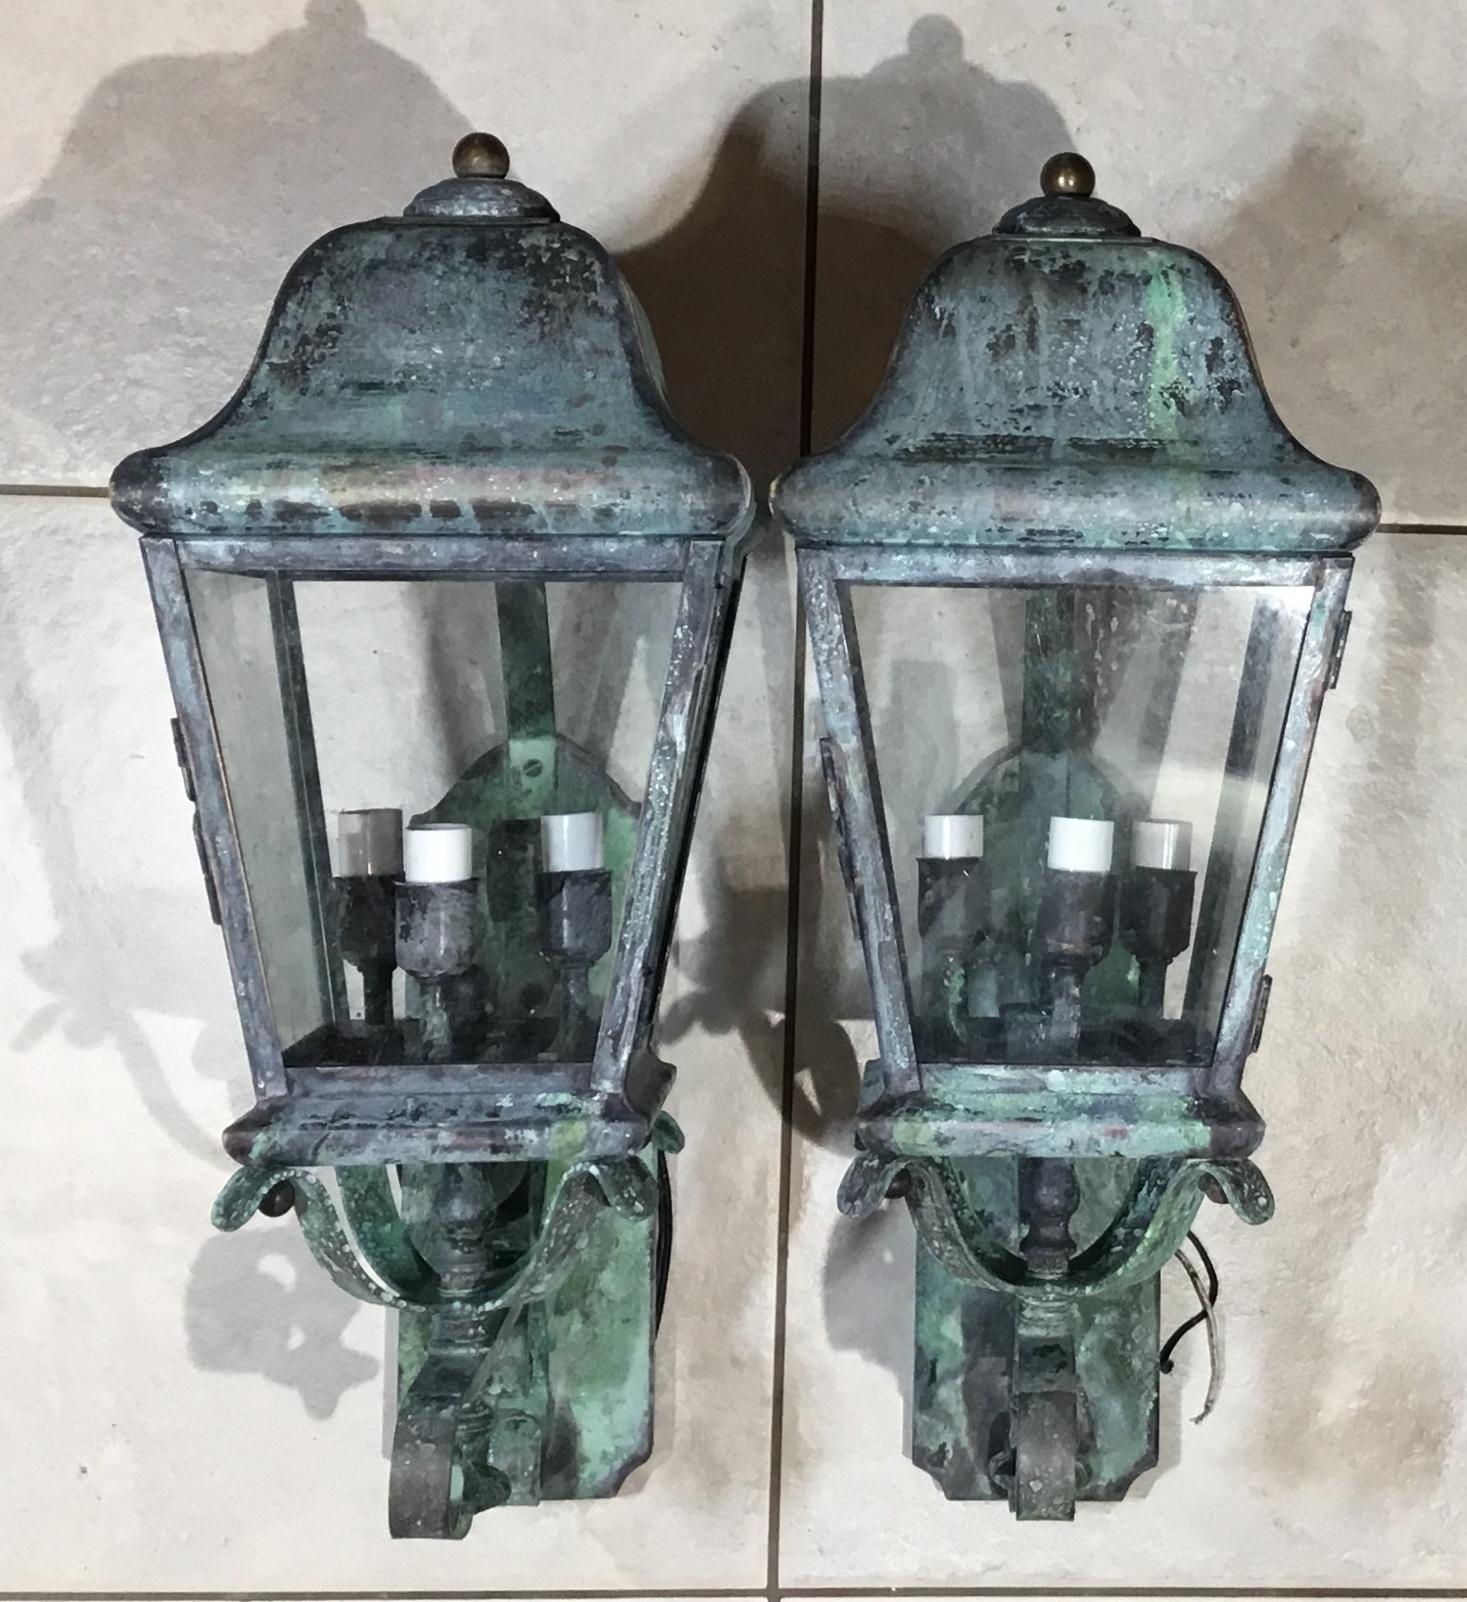 Elegant pair of vintage wall-mounted lanterns made of solid brass, with three 40/watt lights each. Great looking patina and very impressive pair in any front house or indoor space.